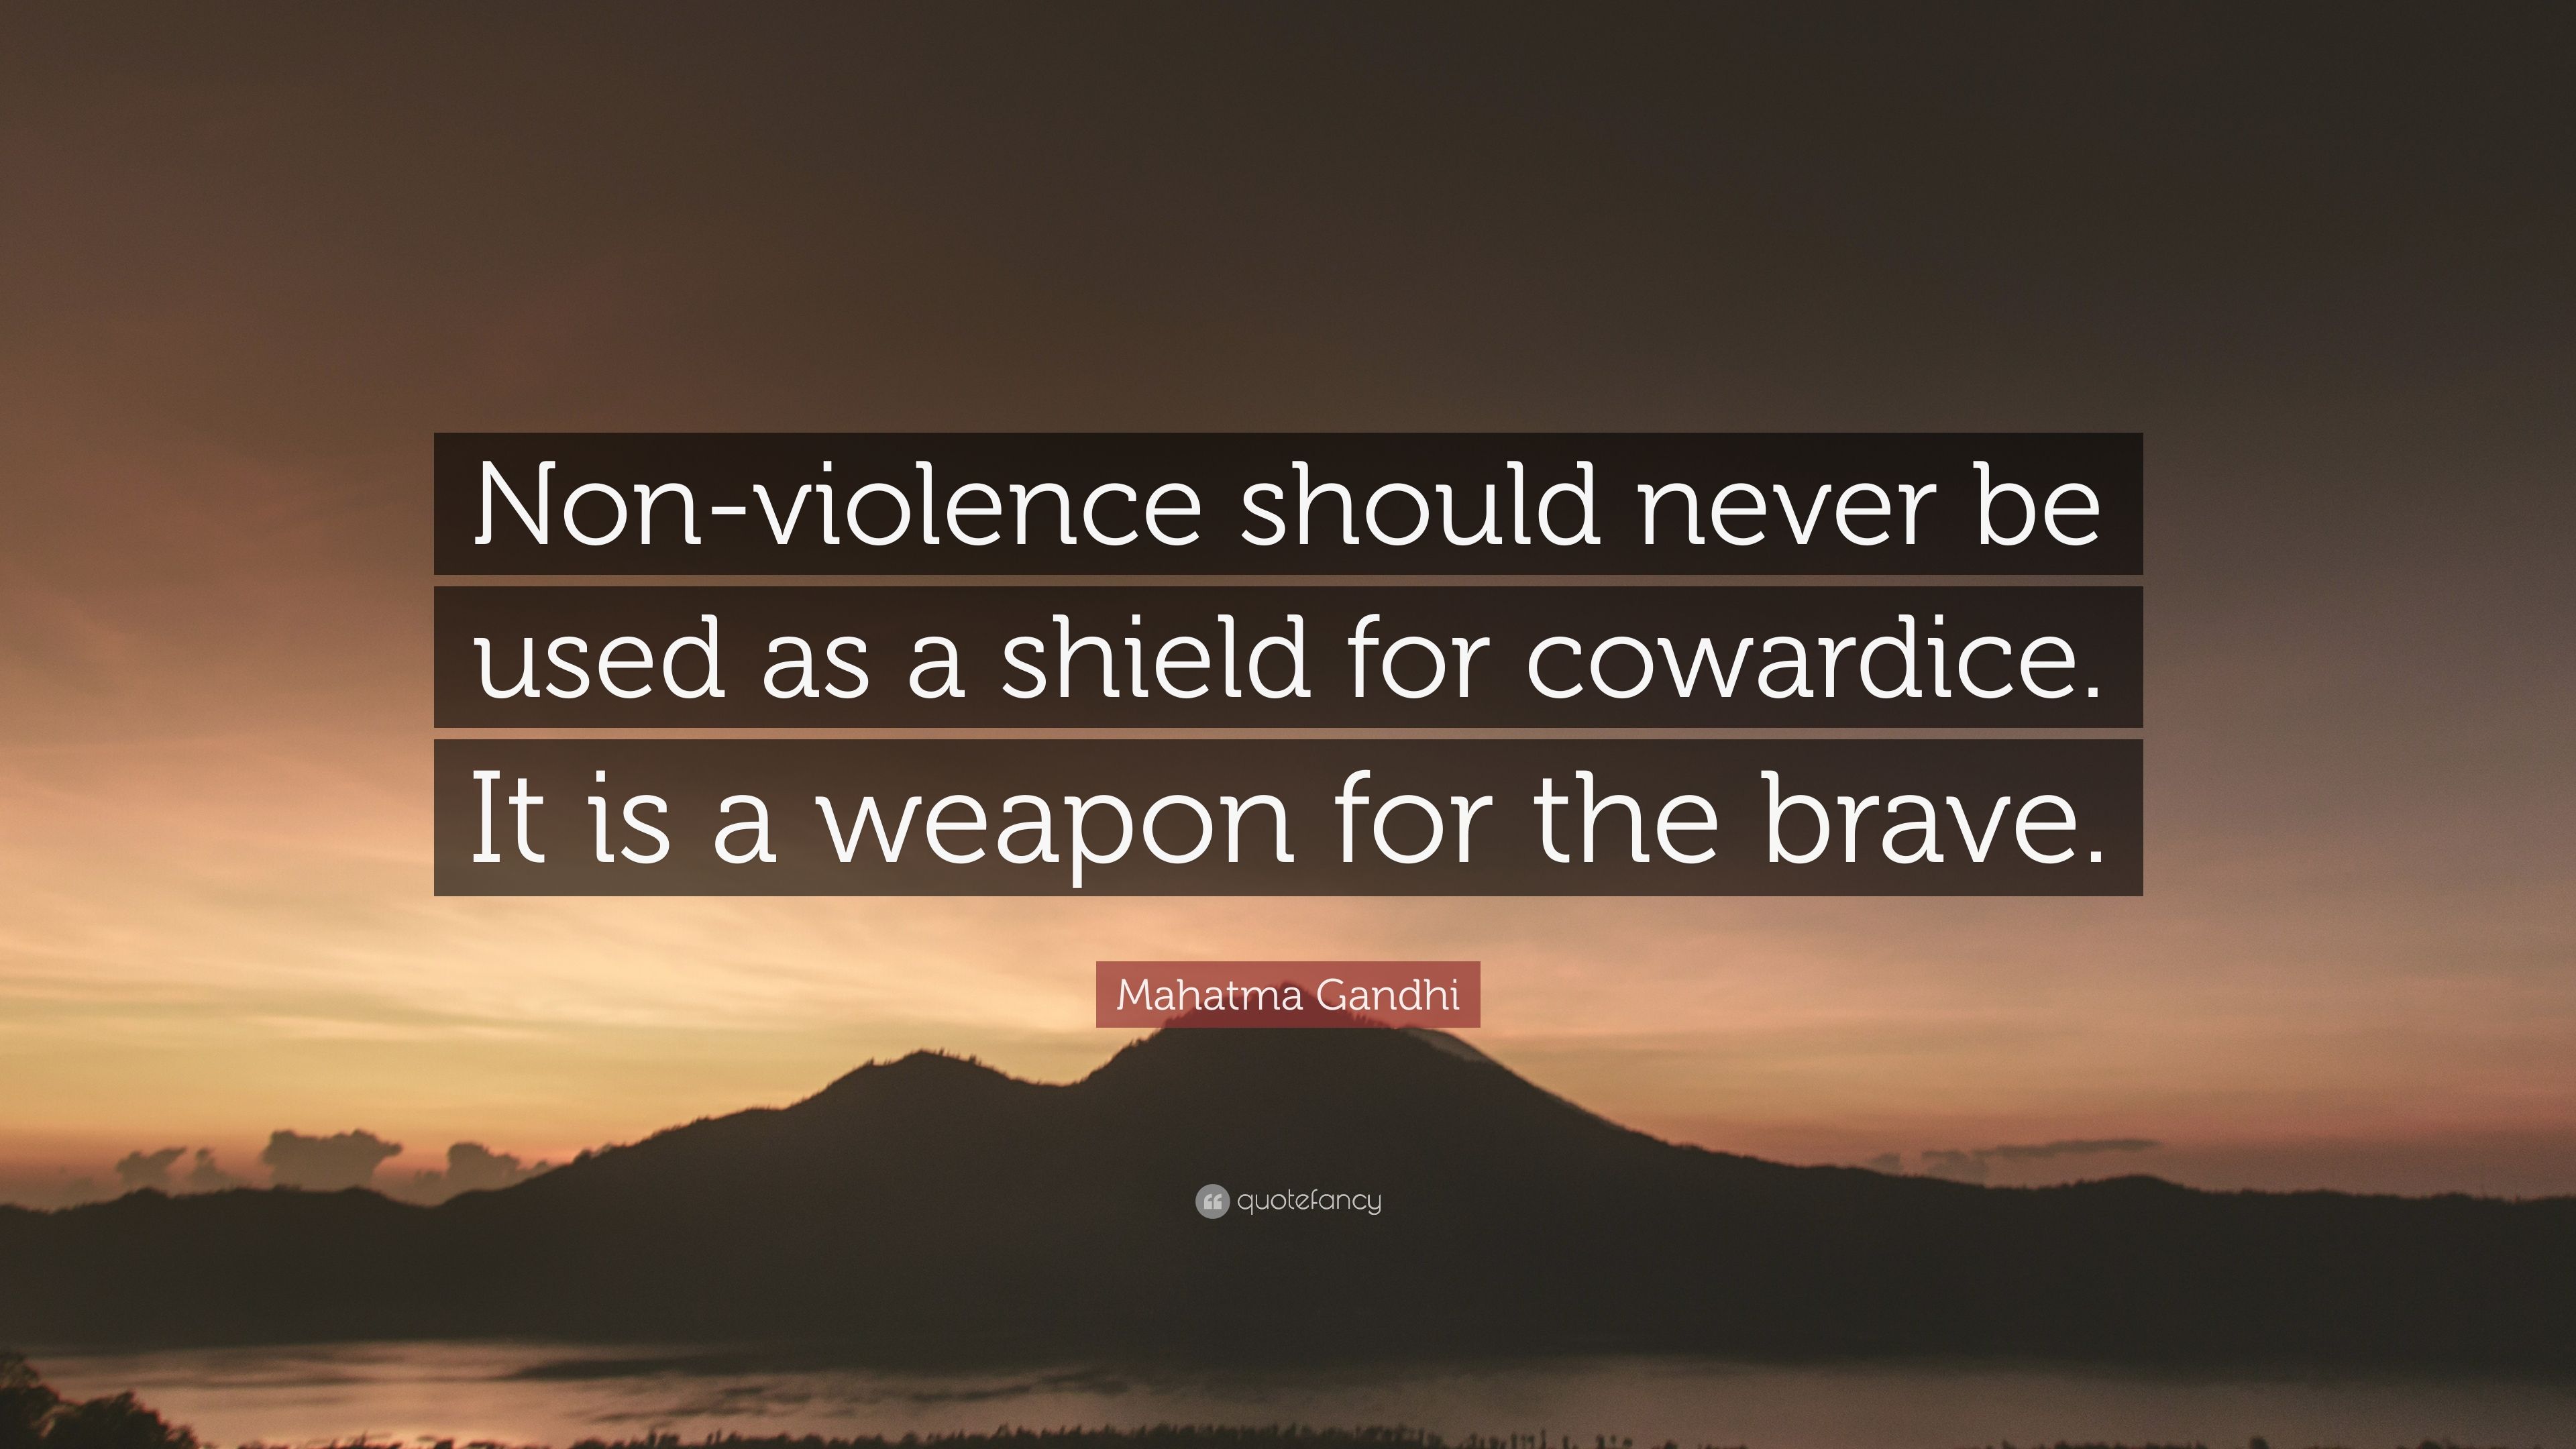 Mahatma Gandhi Quote: “Non Violence Should Never Be Used As A Shield For Cowardice. It Is A Weapon For The Brave.” (7 Wallpaper)